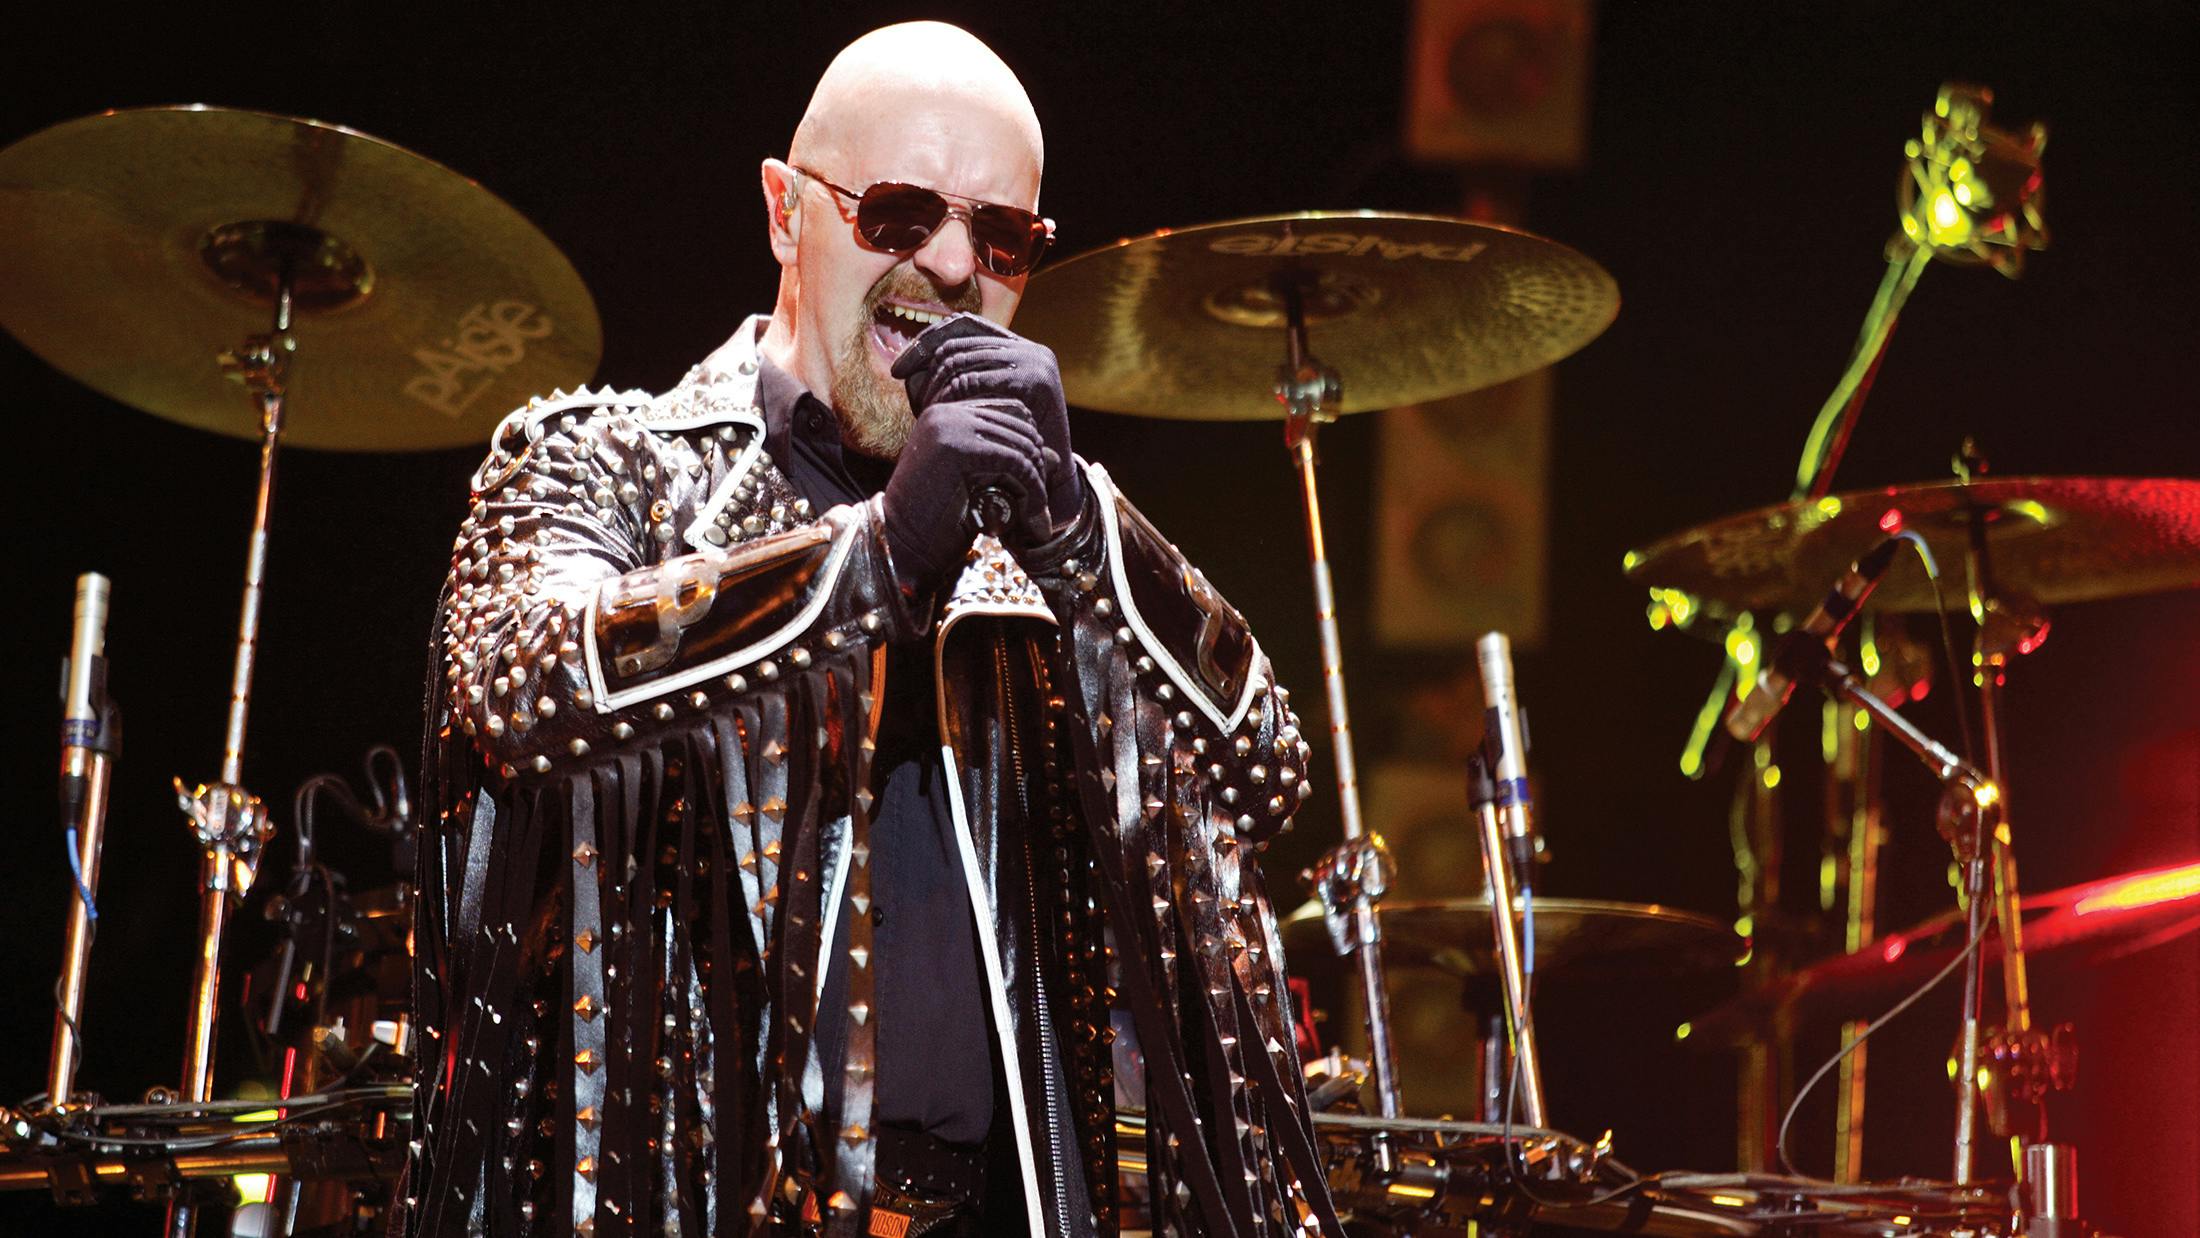 Rob Halford On America's Homophobic Christian Right: "They Want You To Be Scared, And I Refuse To Be"